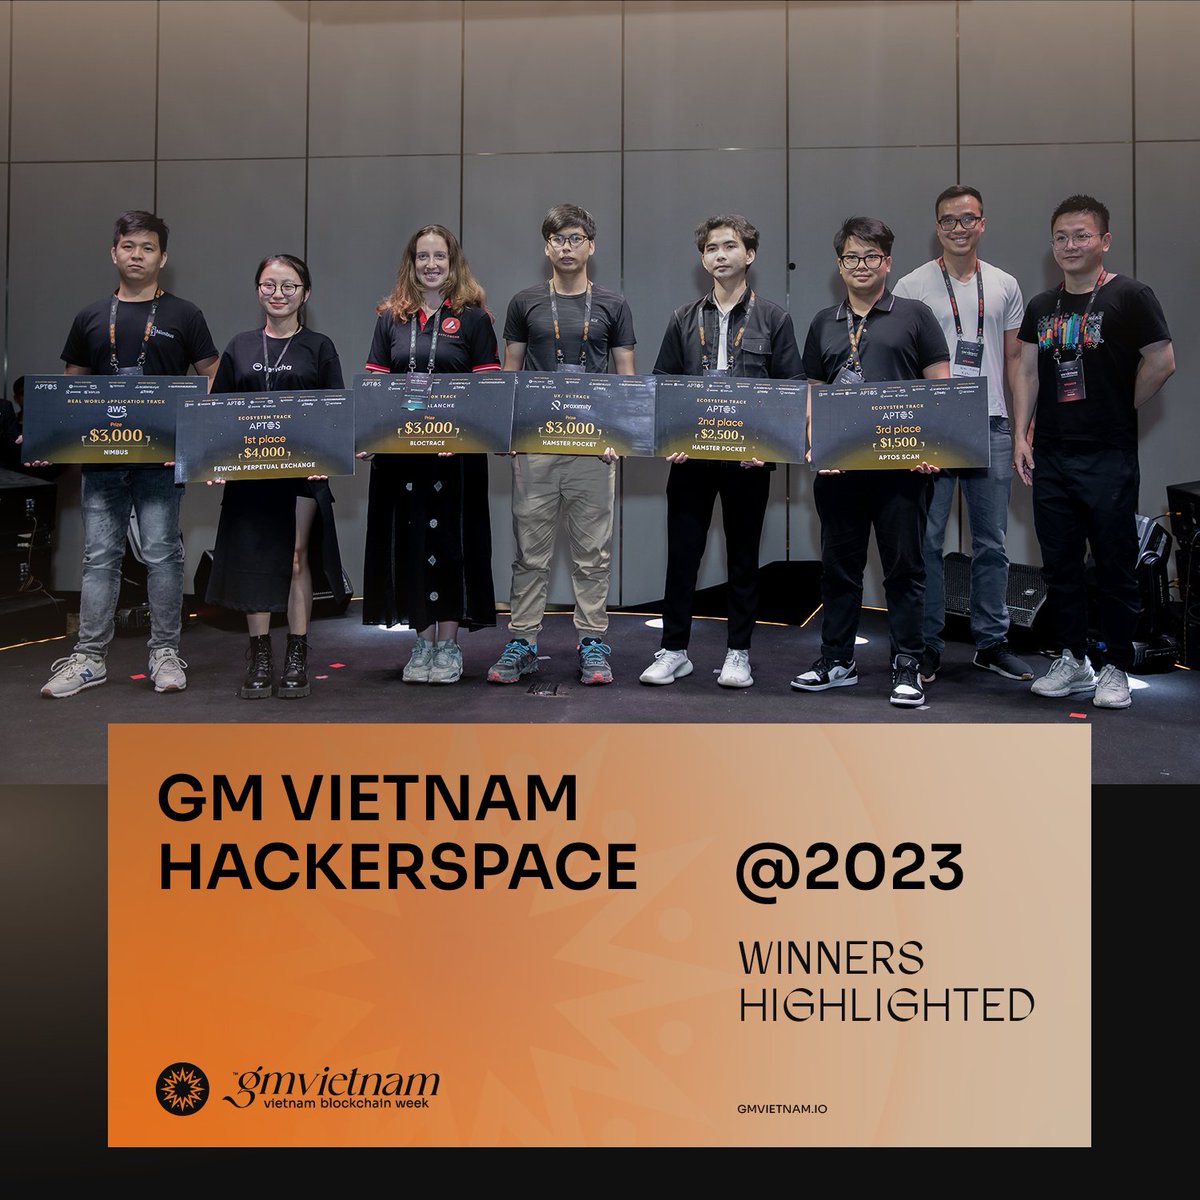 🏆Let's review the winning teams at HackerSpace #GMVN2023!

After a 6-week contest, these outstanding participating teams were selected by a panel of experienced judges.

Don't forget to follow GMVN 2024 for the latest updates on our next HackerSpace.

📍gmvietnam.io